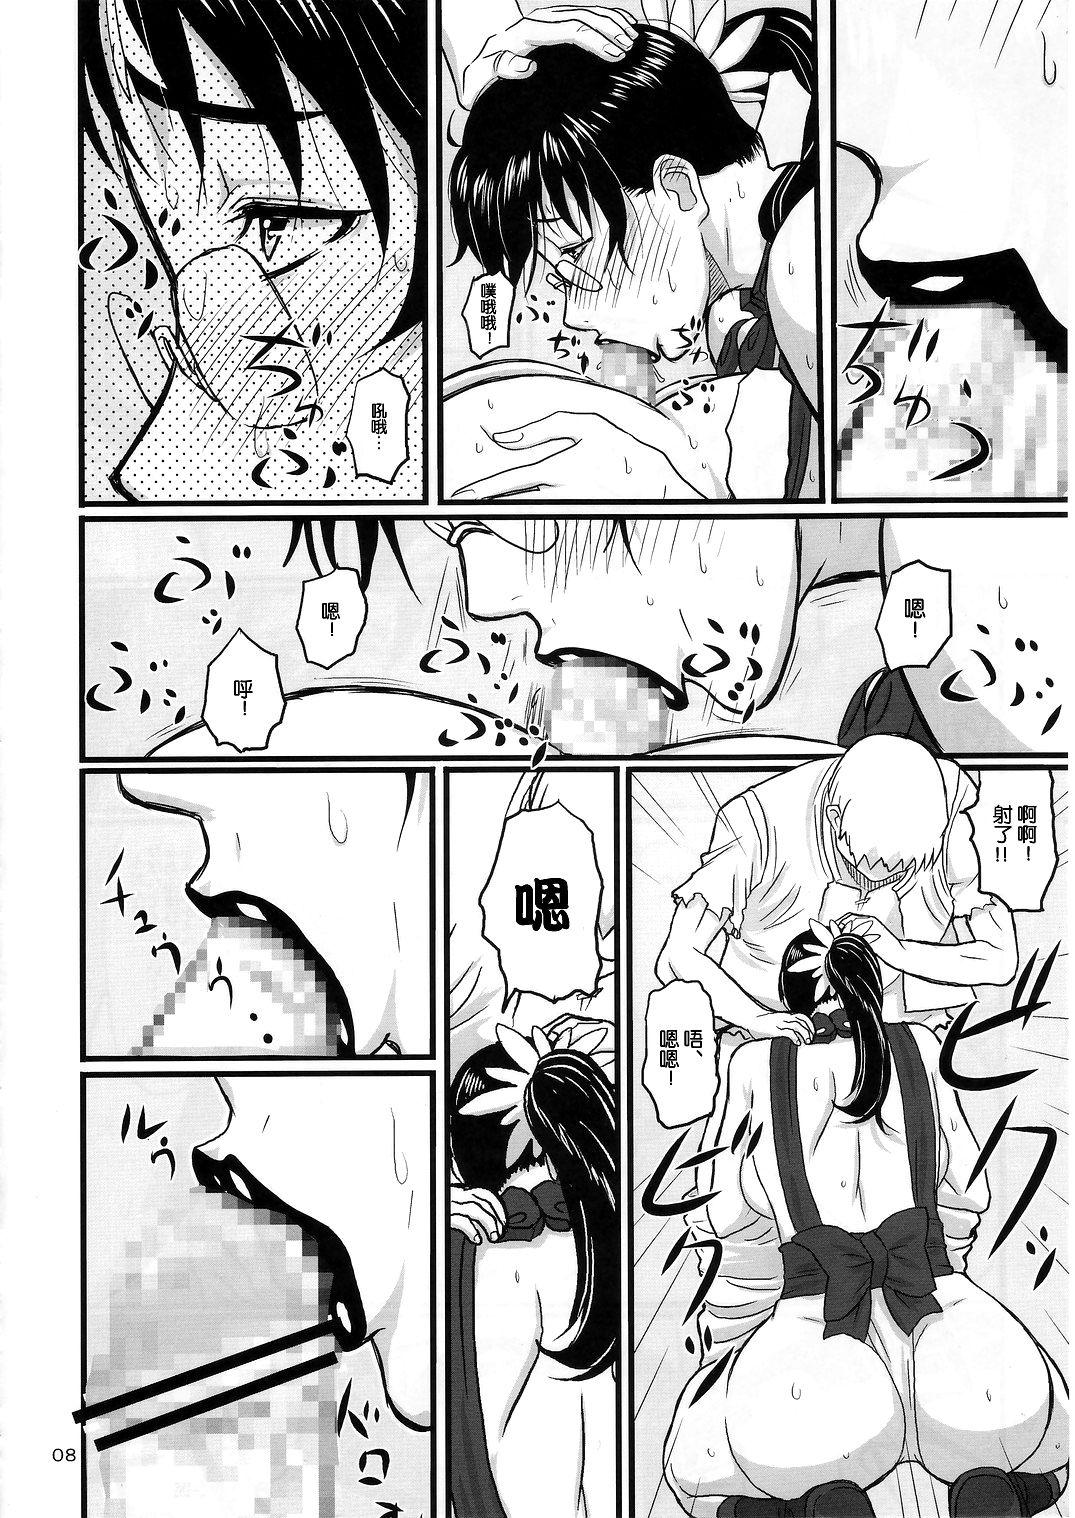 Bhabhi Package Meat - Queens blade Students - Page 8